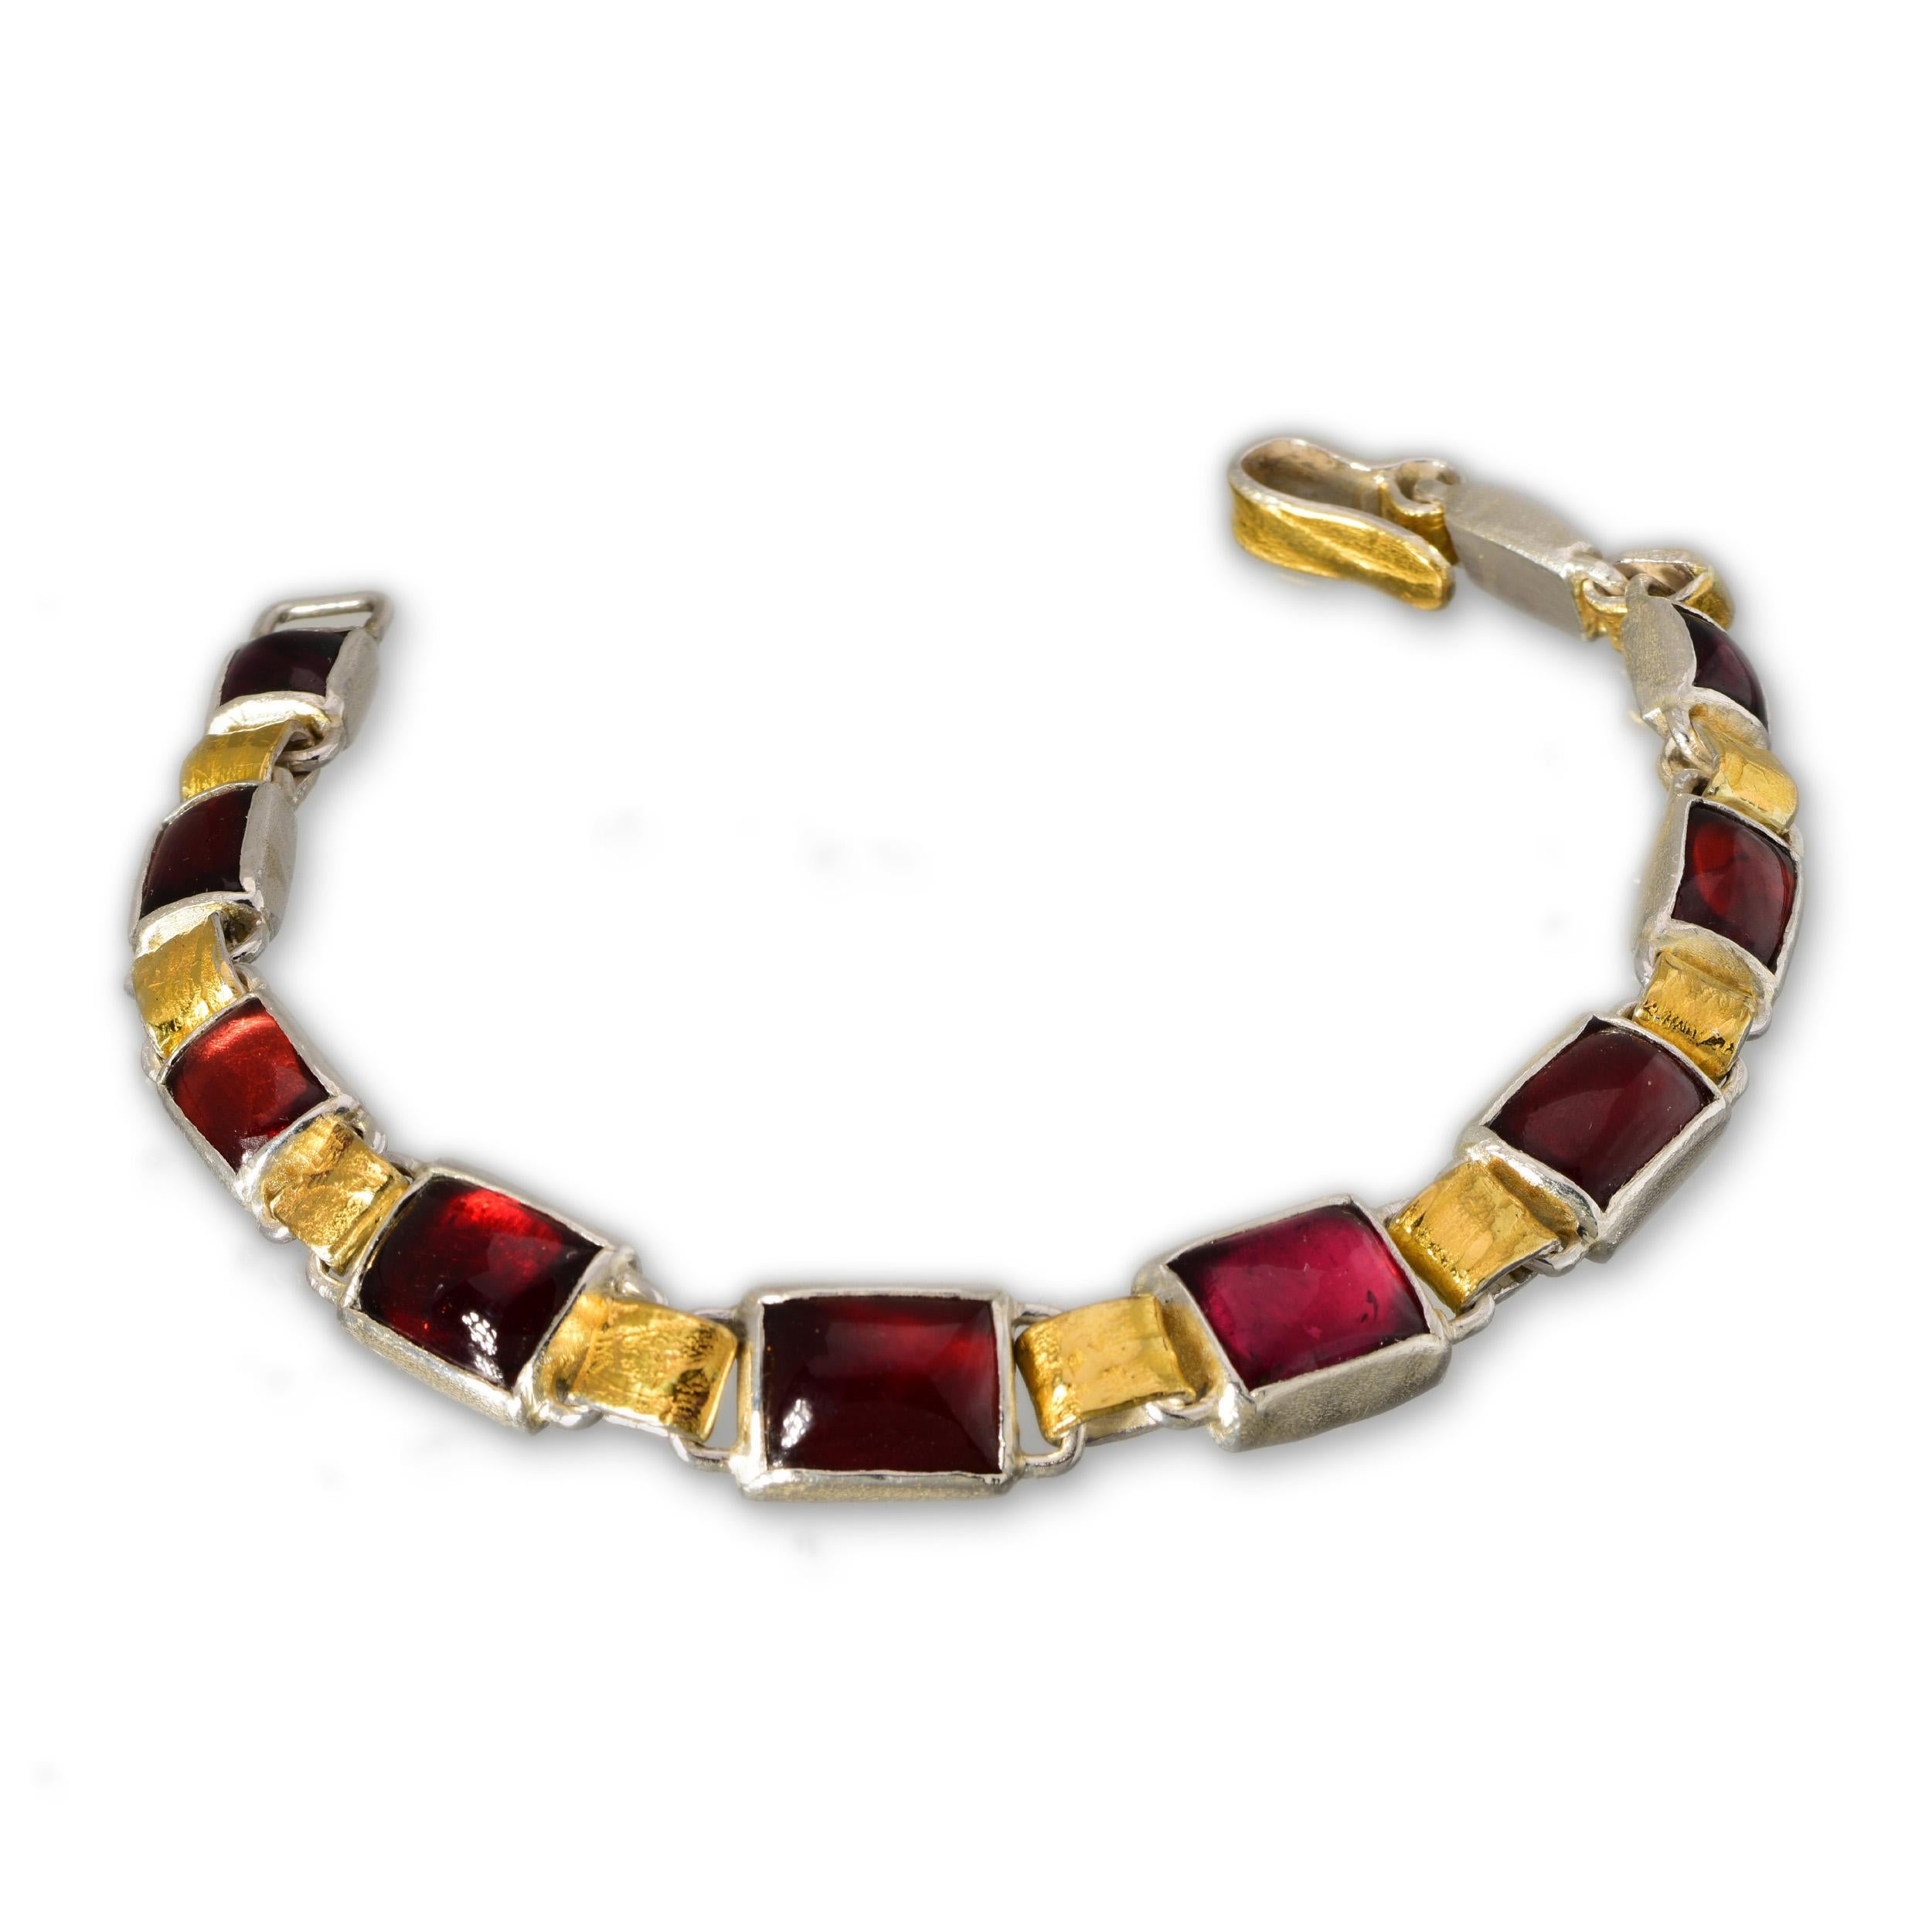 This charming bracelet is made out of deep red wine-coloured garnets and a single secret tourmaline with 22kt yellow gold and silver. The links and the clasp have all been hand-constructed using 22kt gold paper-pressed patterns and textures and